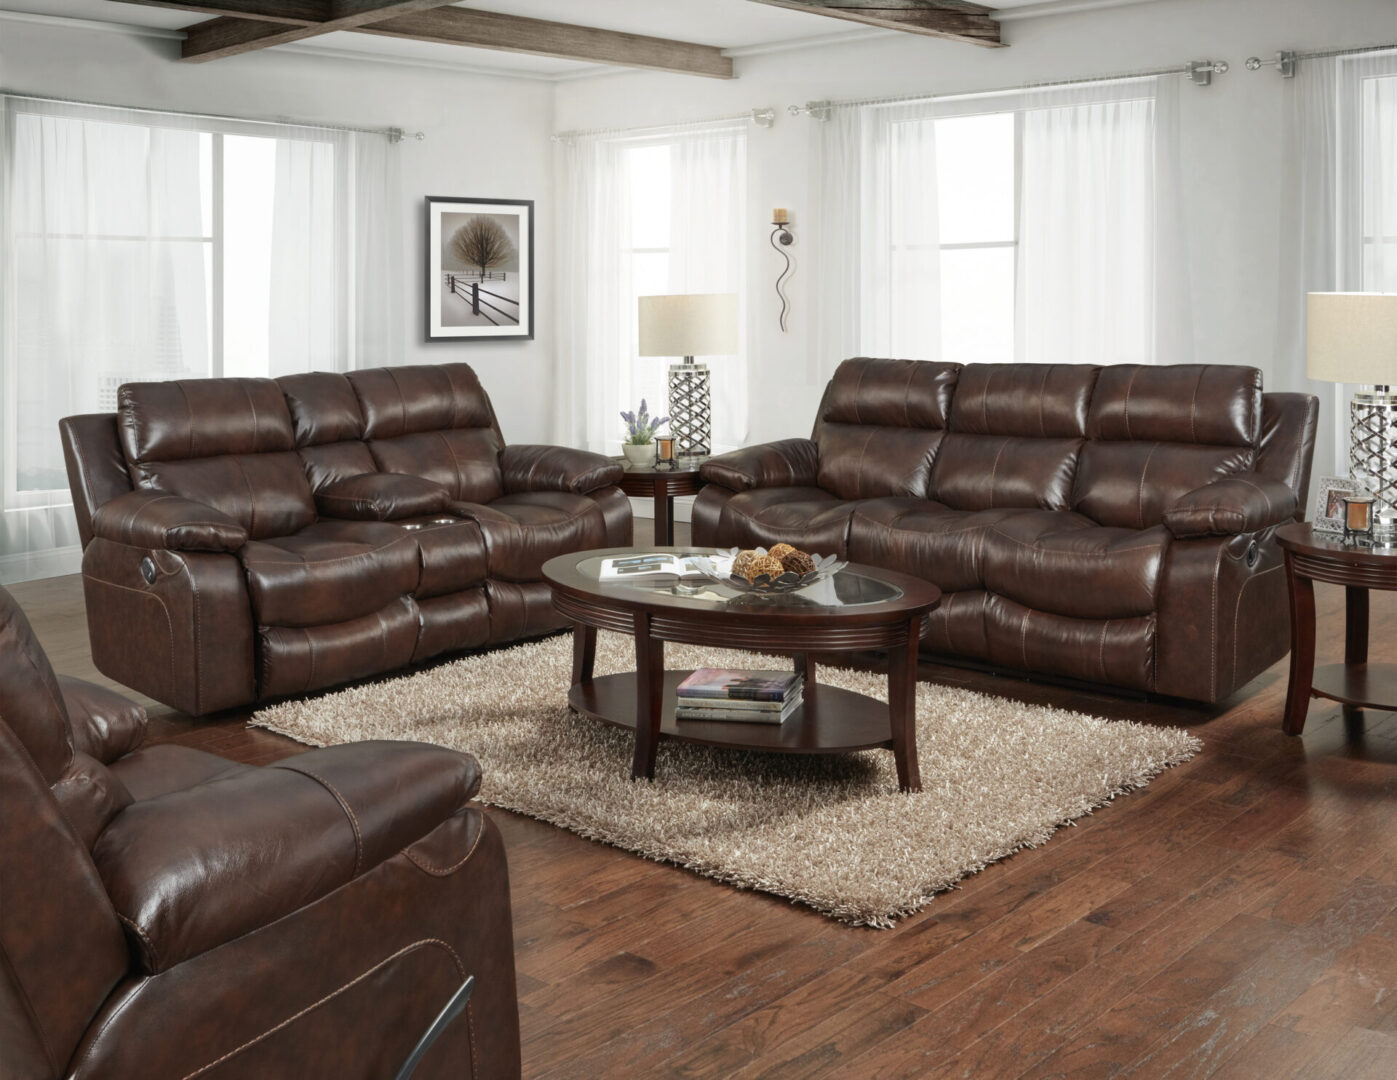 A living room with brown leather furniture and a coffee table.